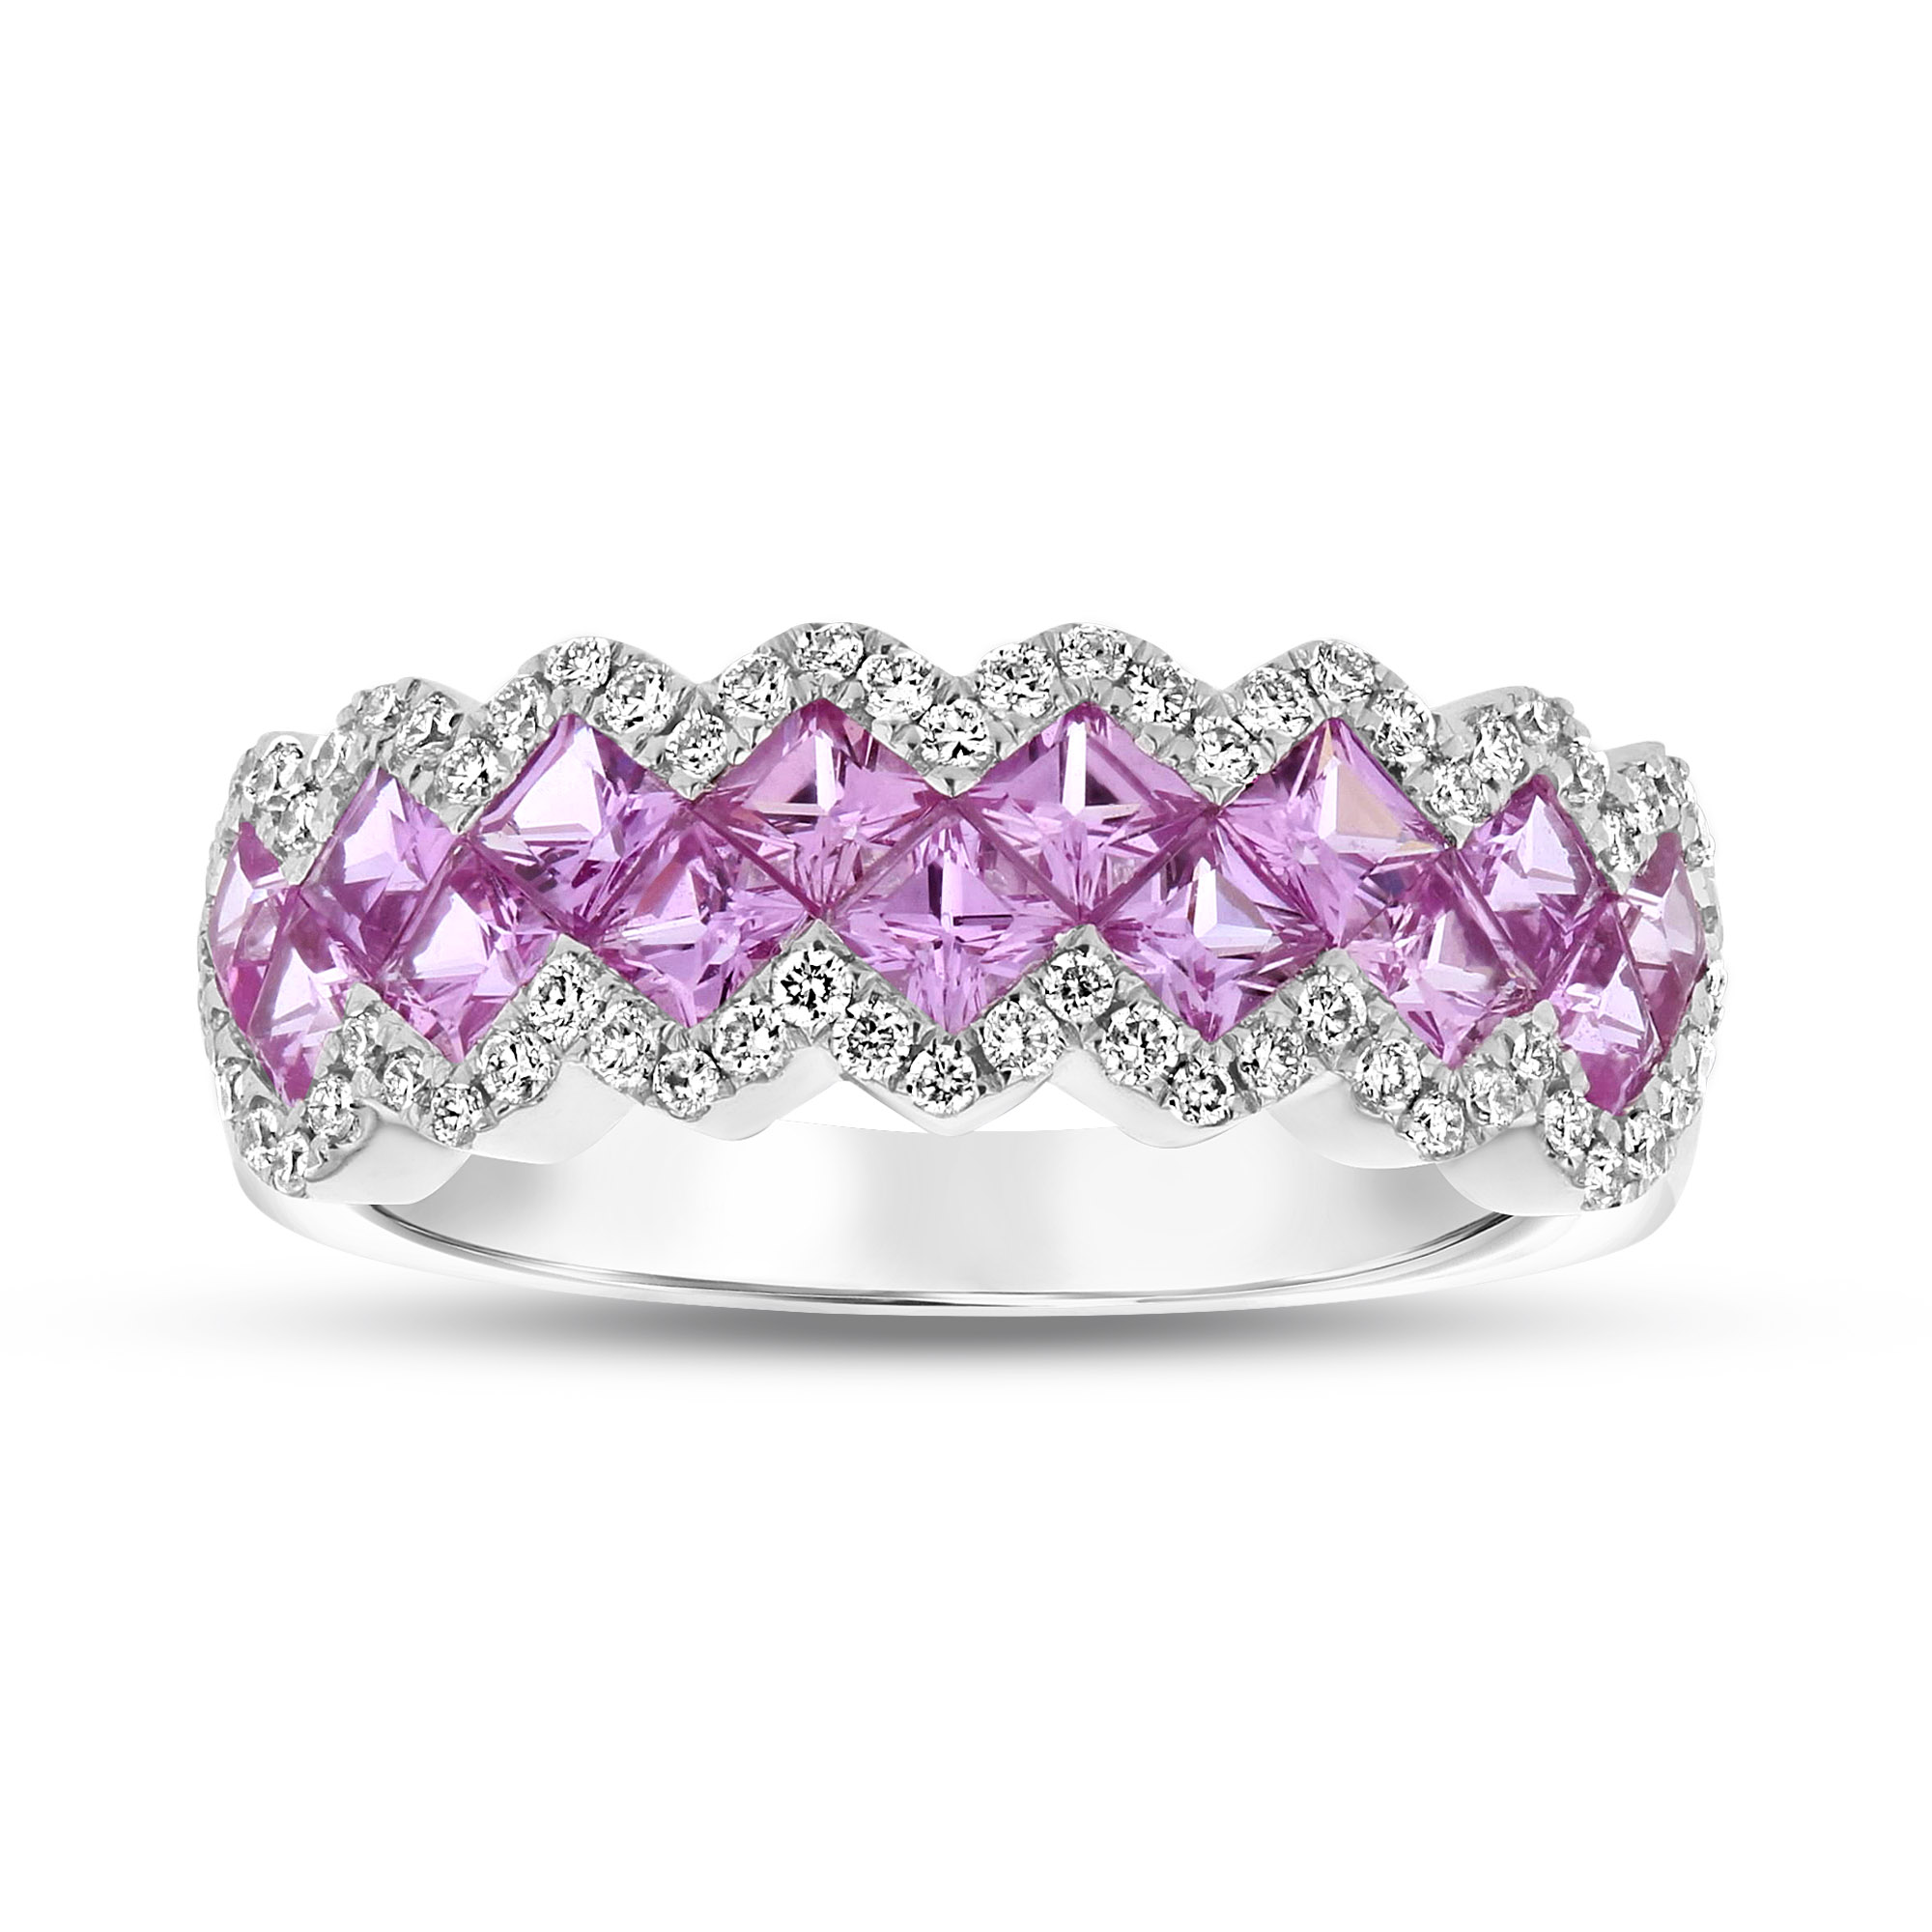 View 1.83ctw Diamond and Pink Sapphire Ring in 18k White Gold